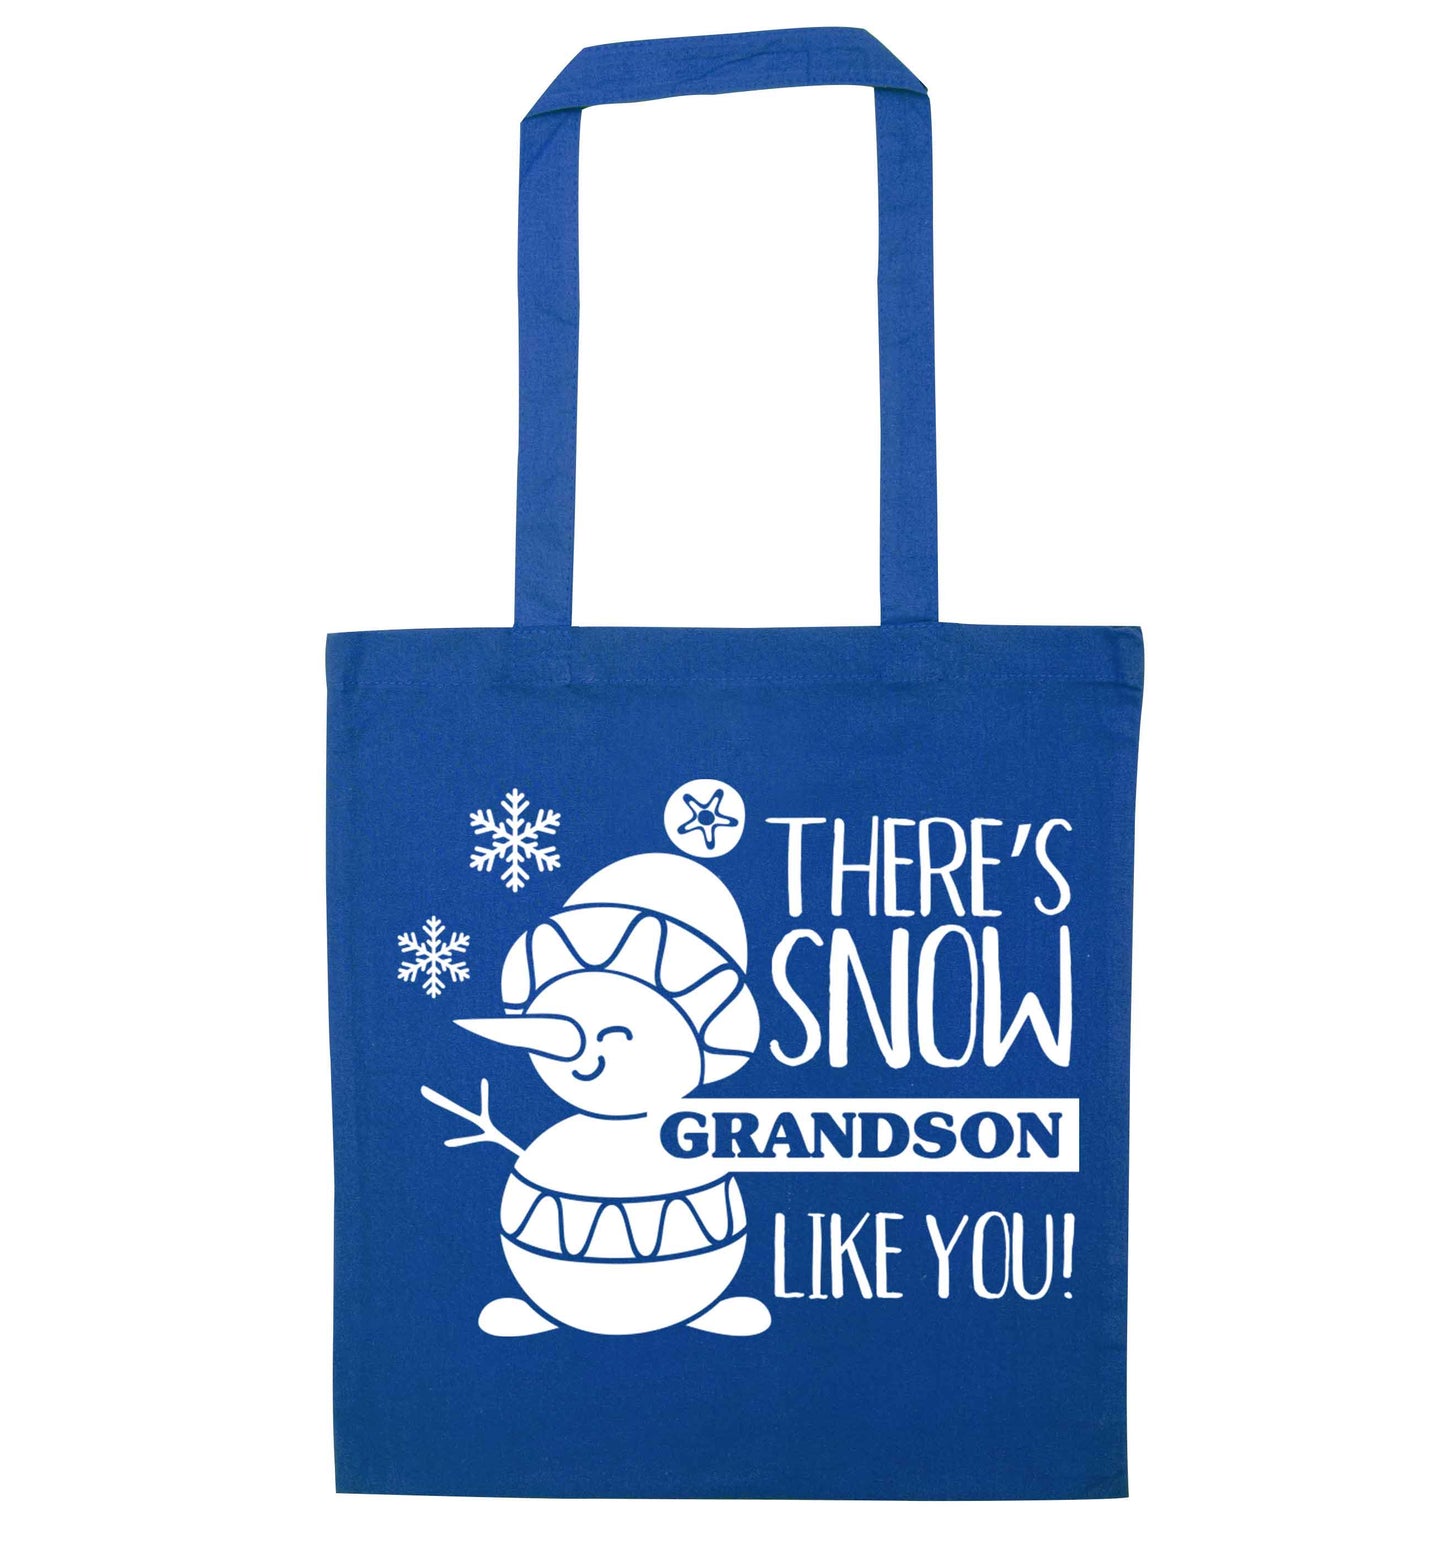 There's snow grandson like you blue tote bag